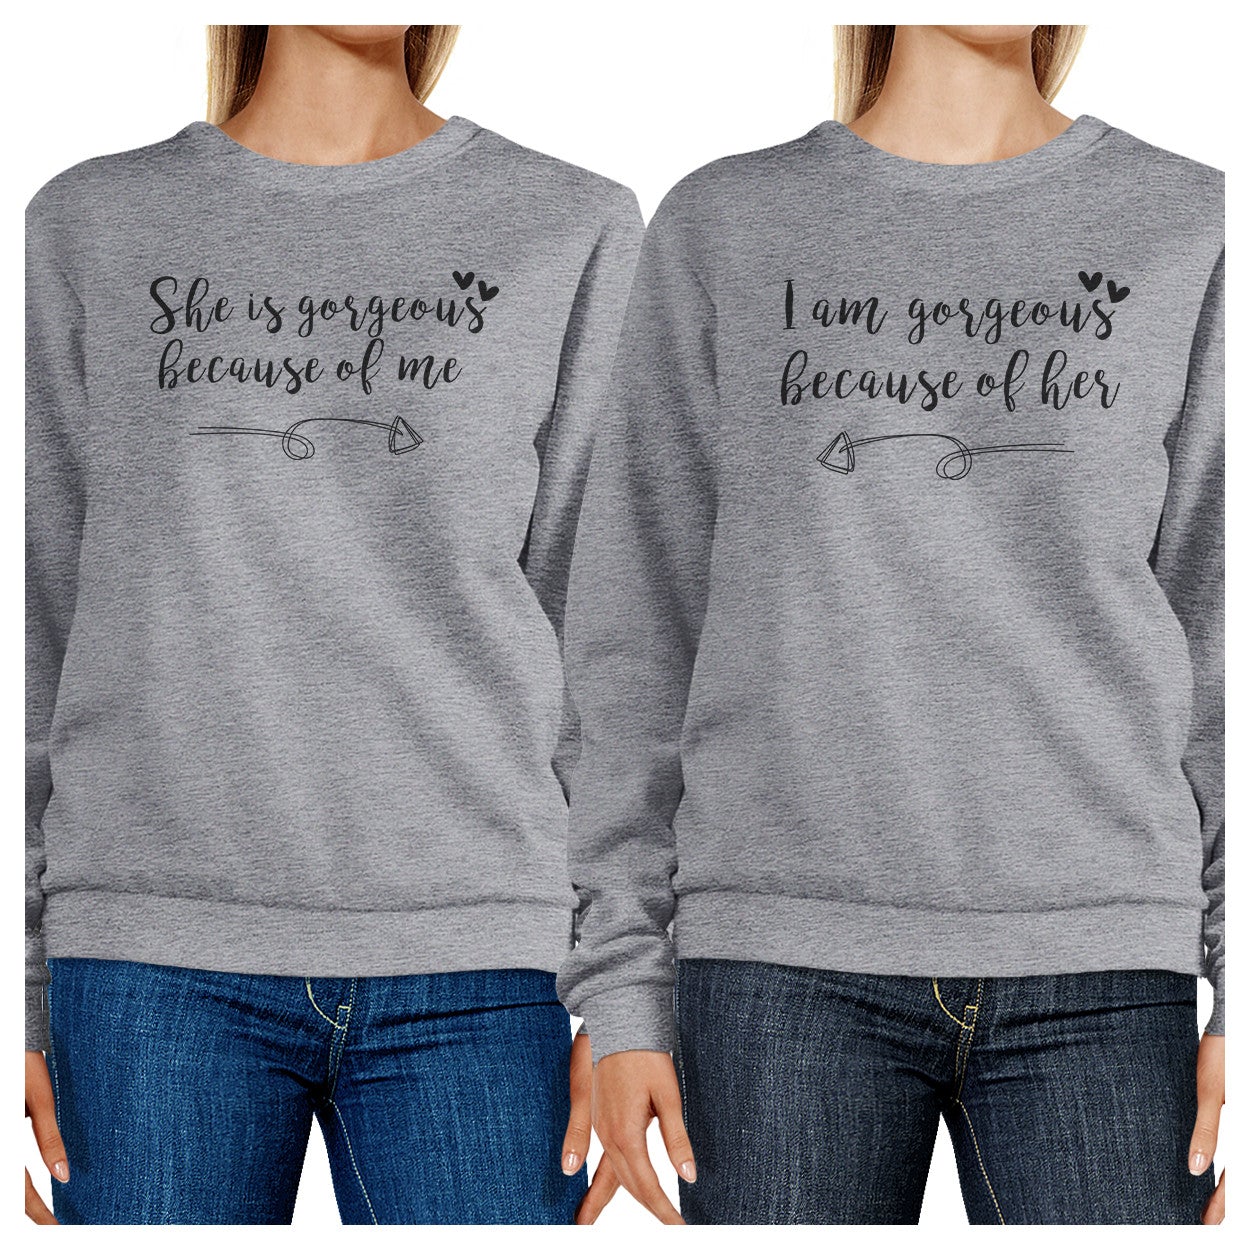 She Is Gorgeous Grey Funny Graphic Sweatshirts Mothers Day Gifts - 365 In Love